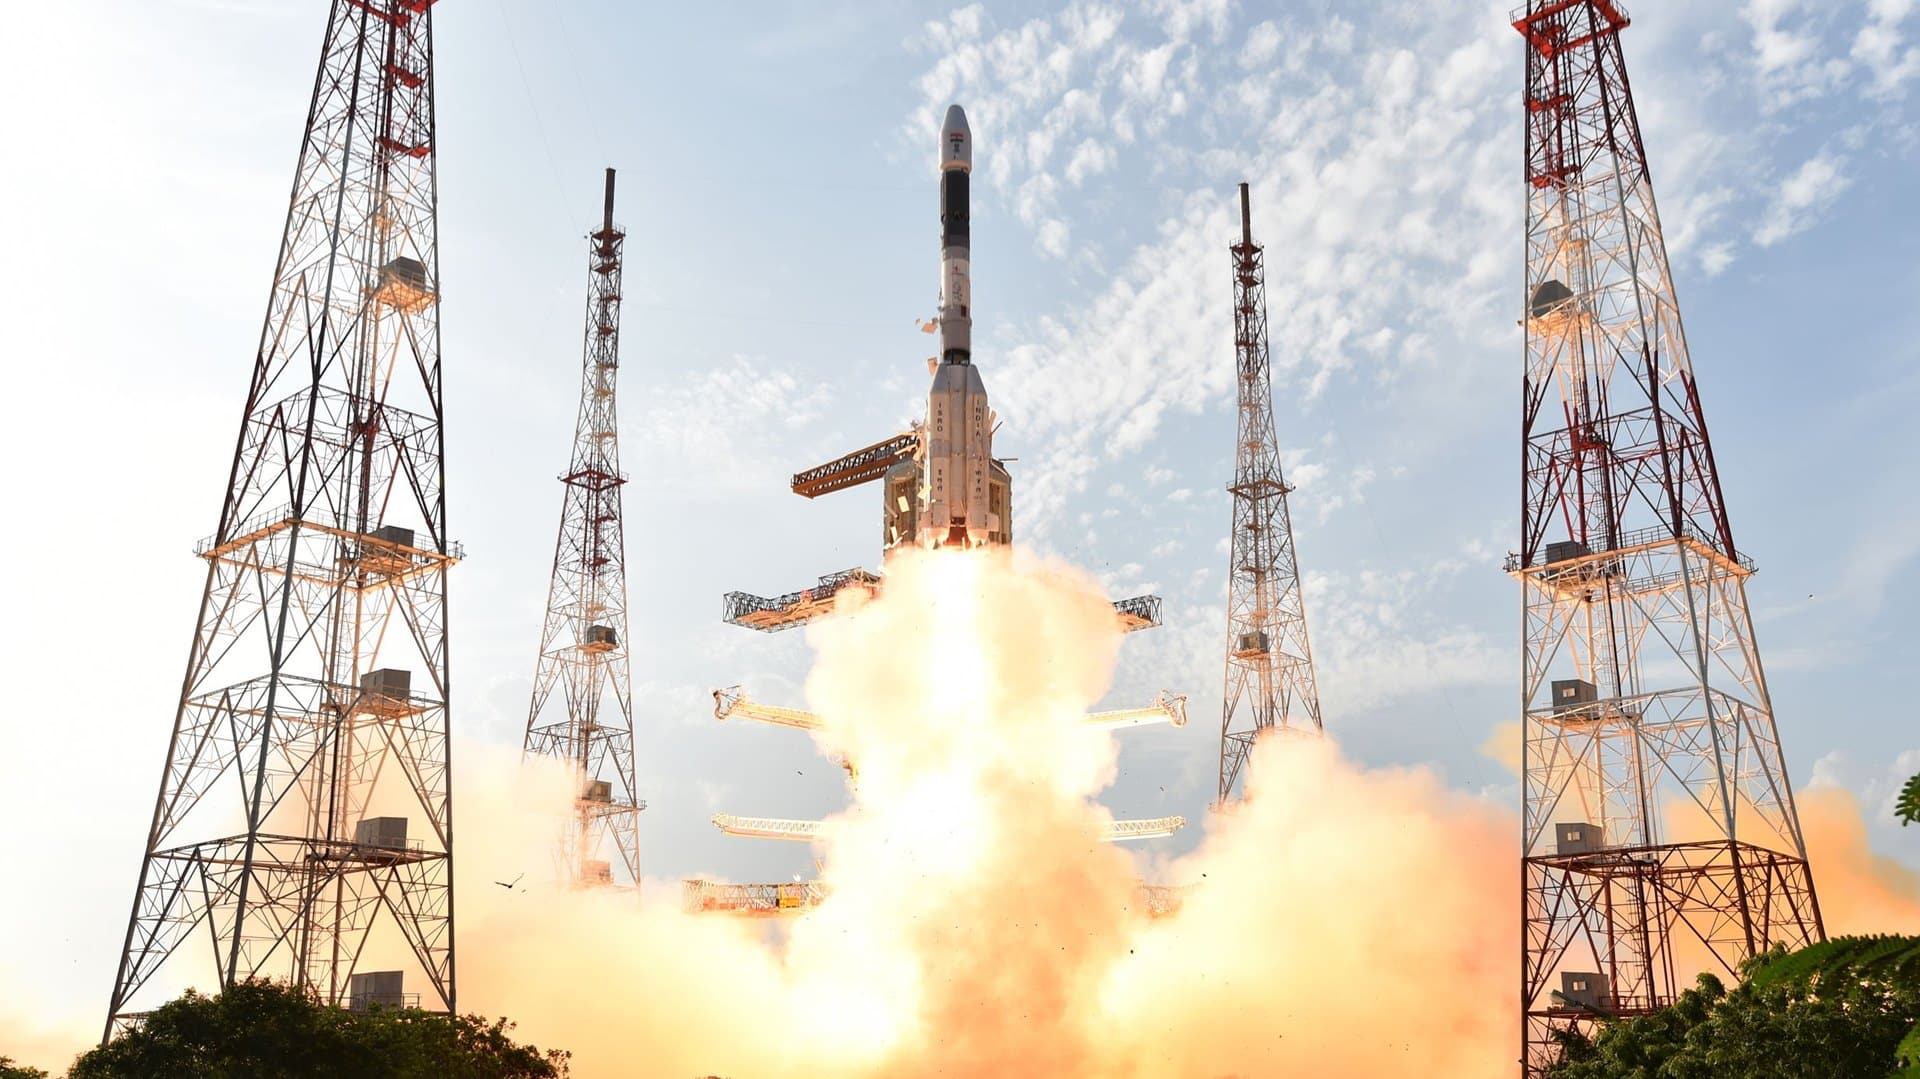 'Lot of interest from foreign companies to invest in India's space sector'